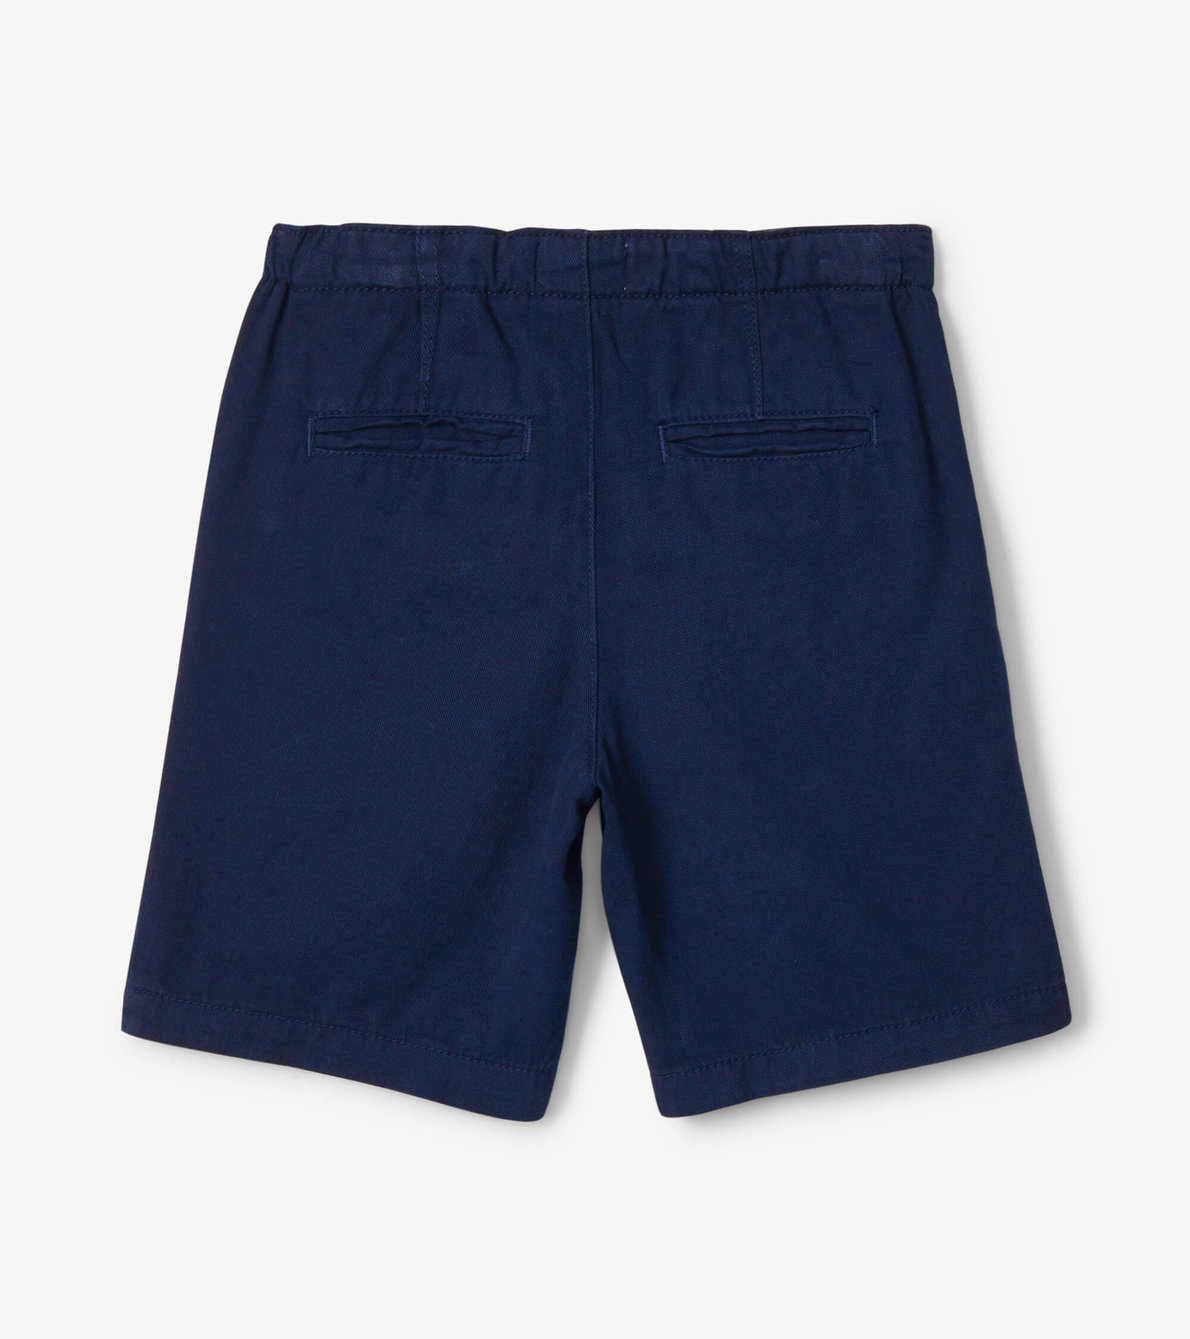 View larger image of Navy Twill Shorts